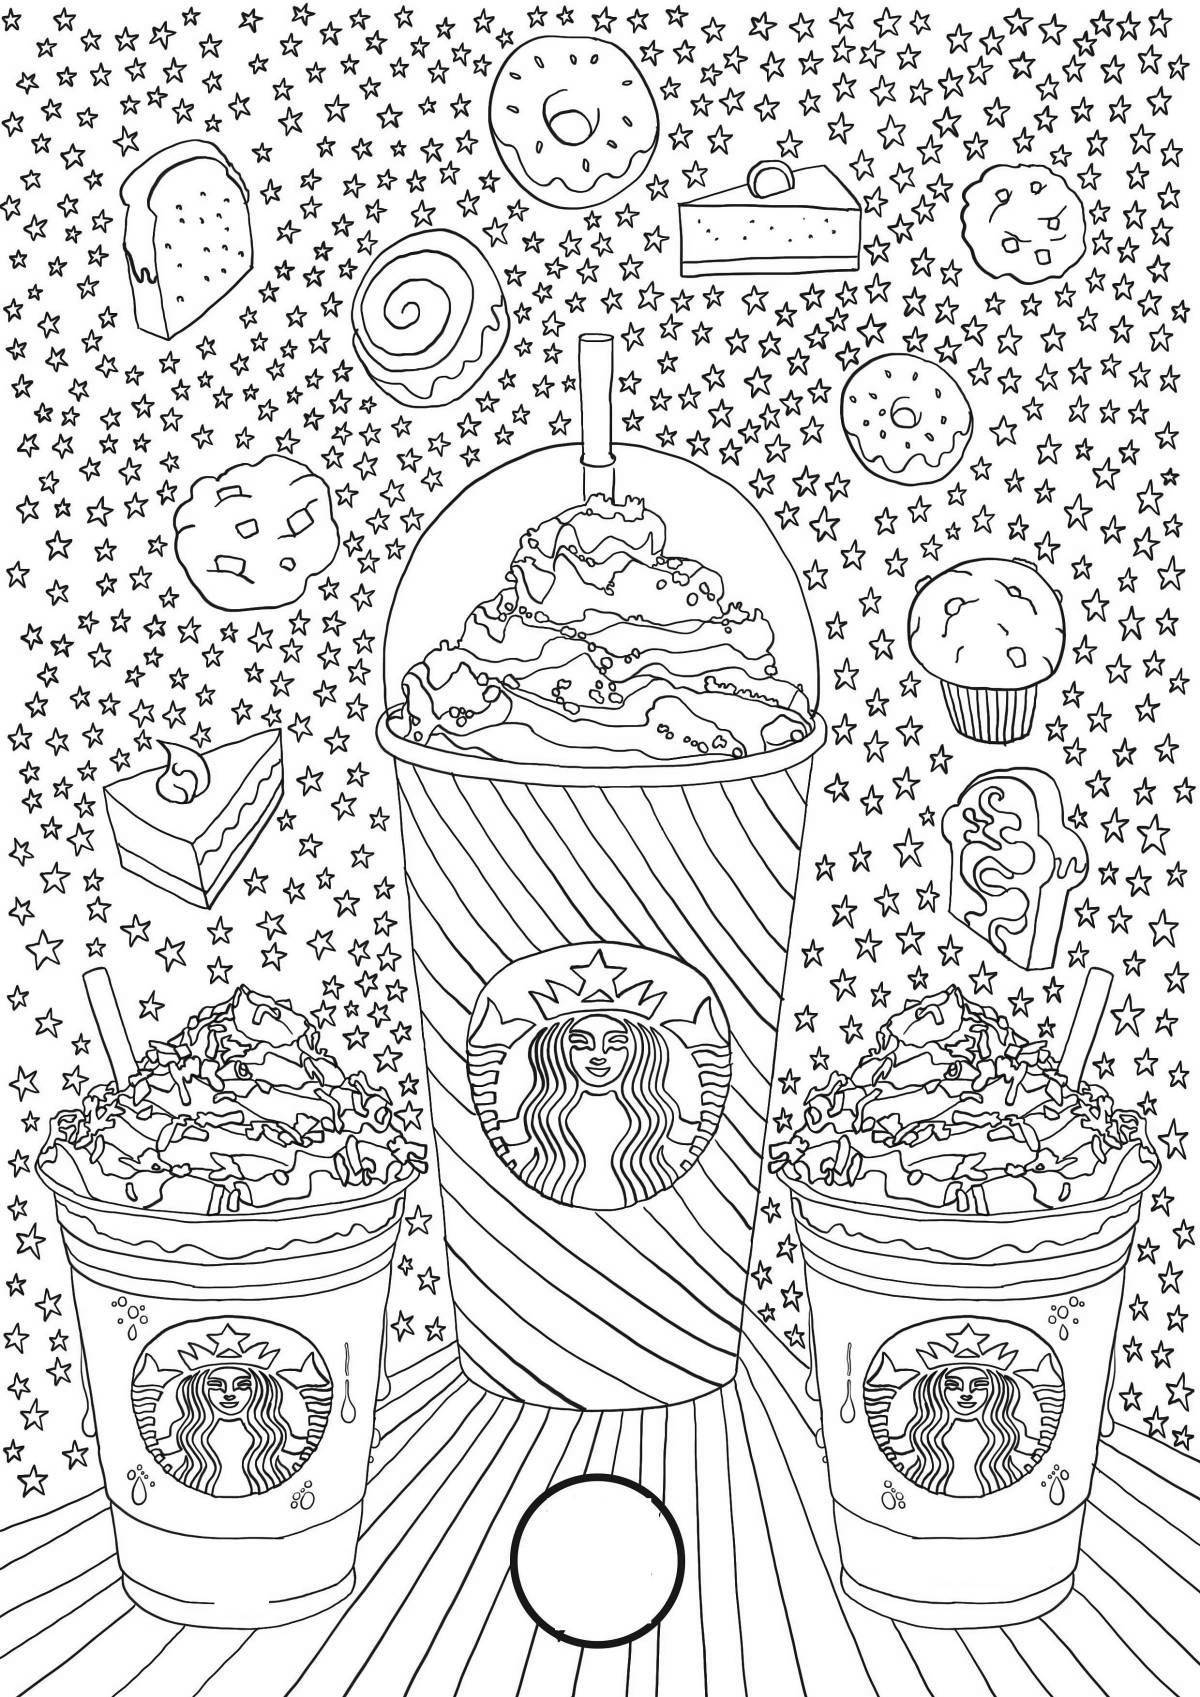 Charming lung coloring page